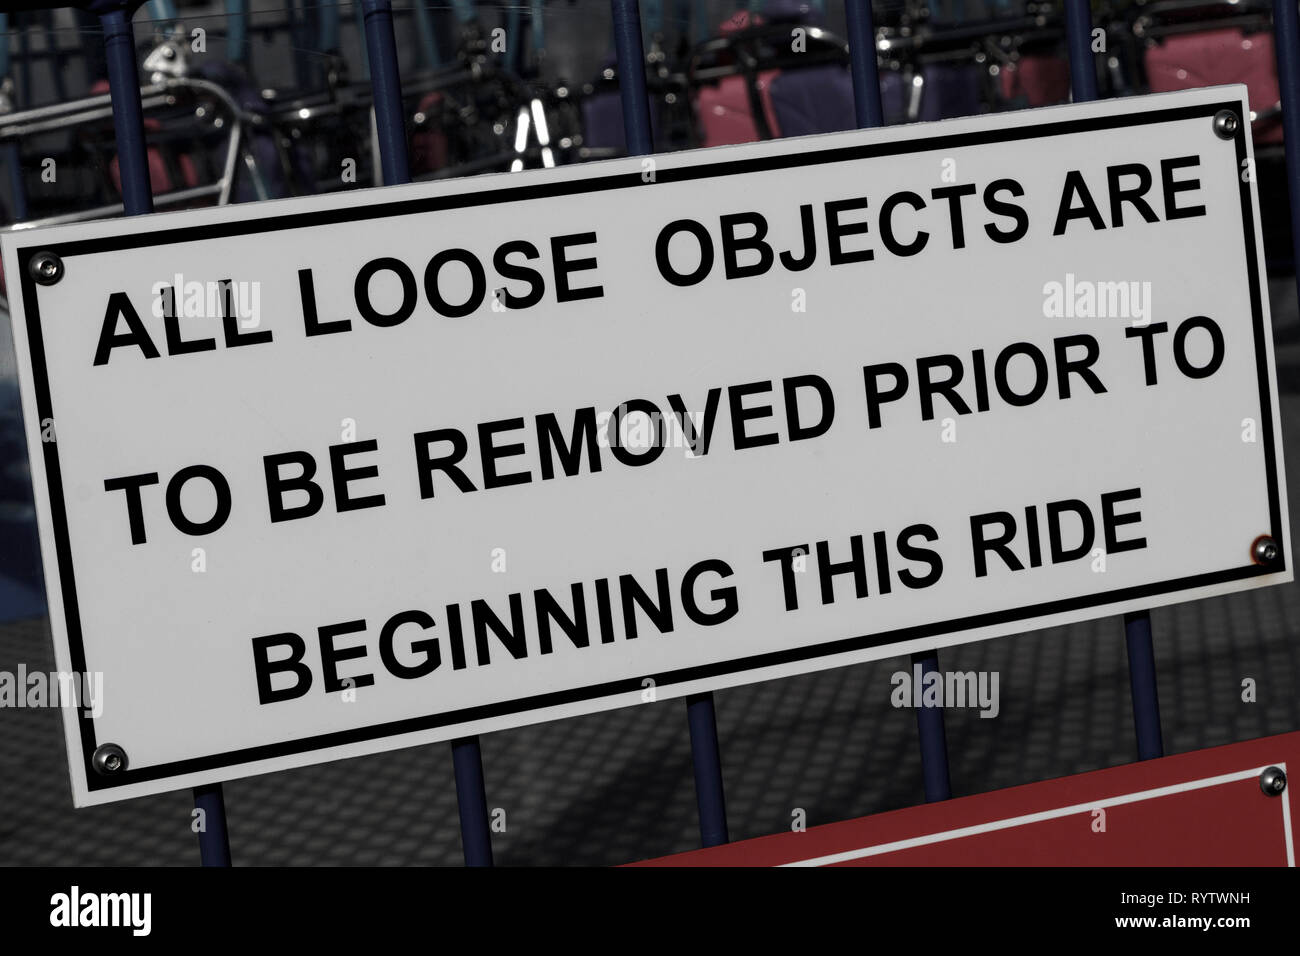 Sign in a funfair warning 'All loose objects are to be removed prior to beginning this ride'. Health and safety. Stock Photo